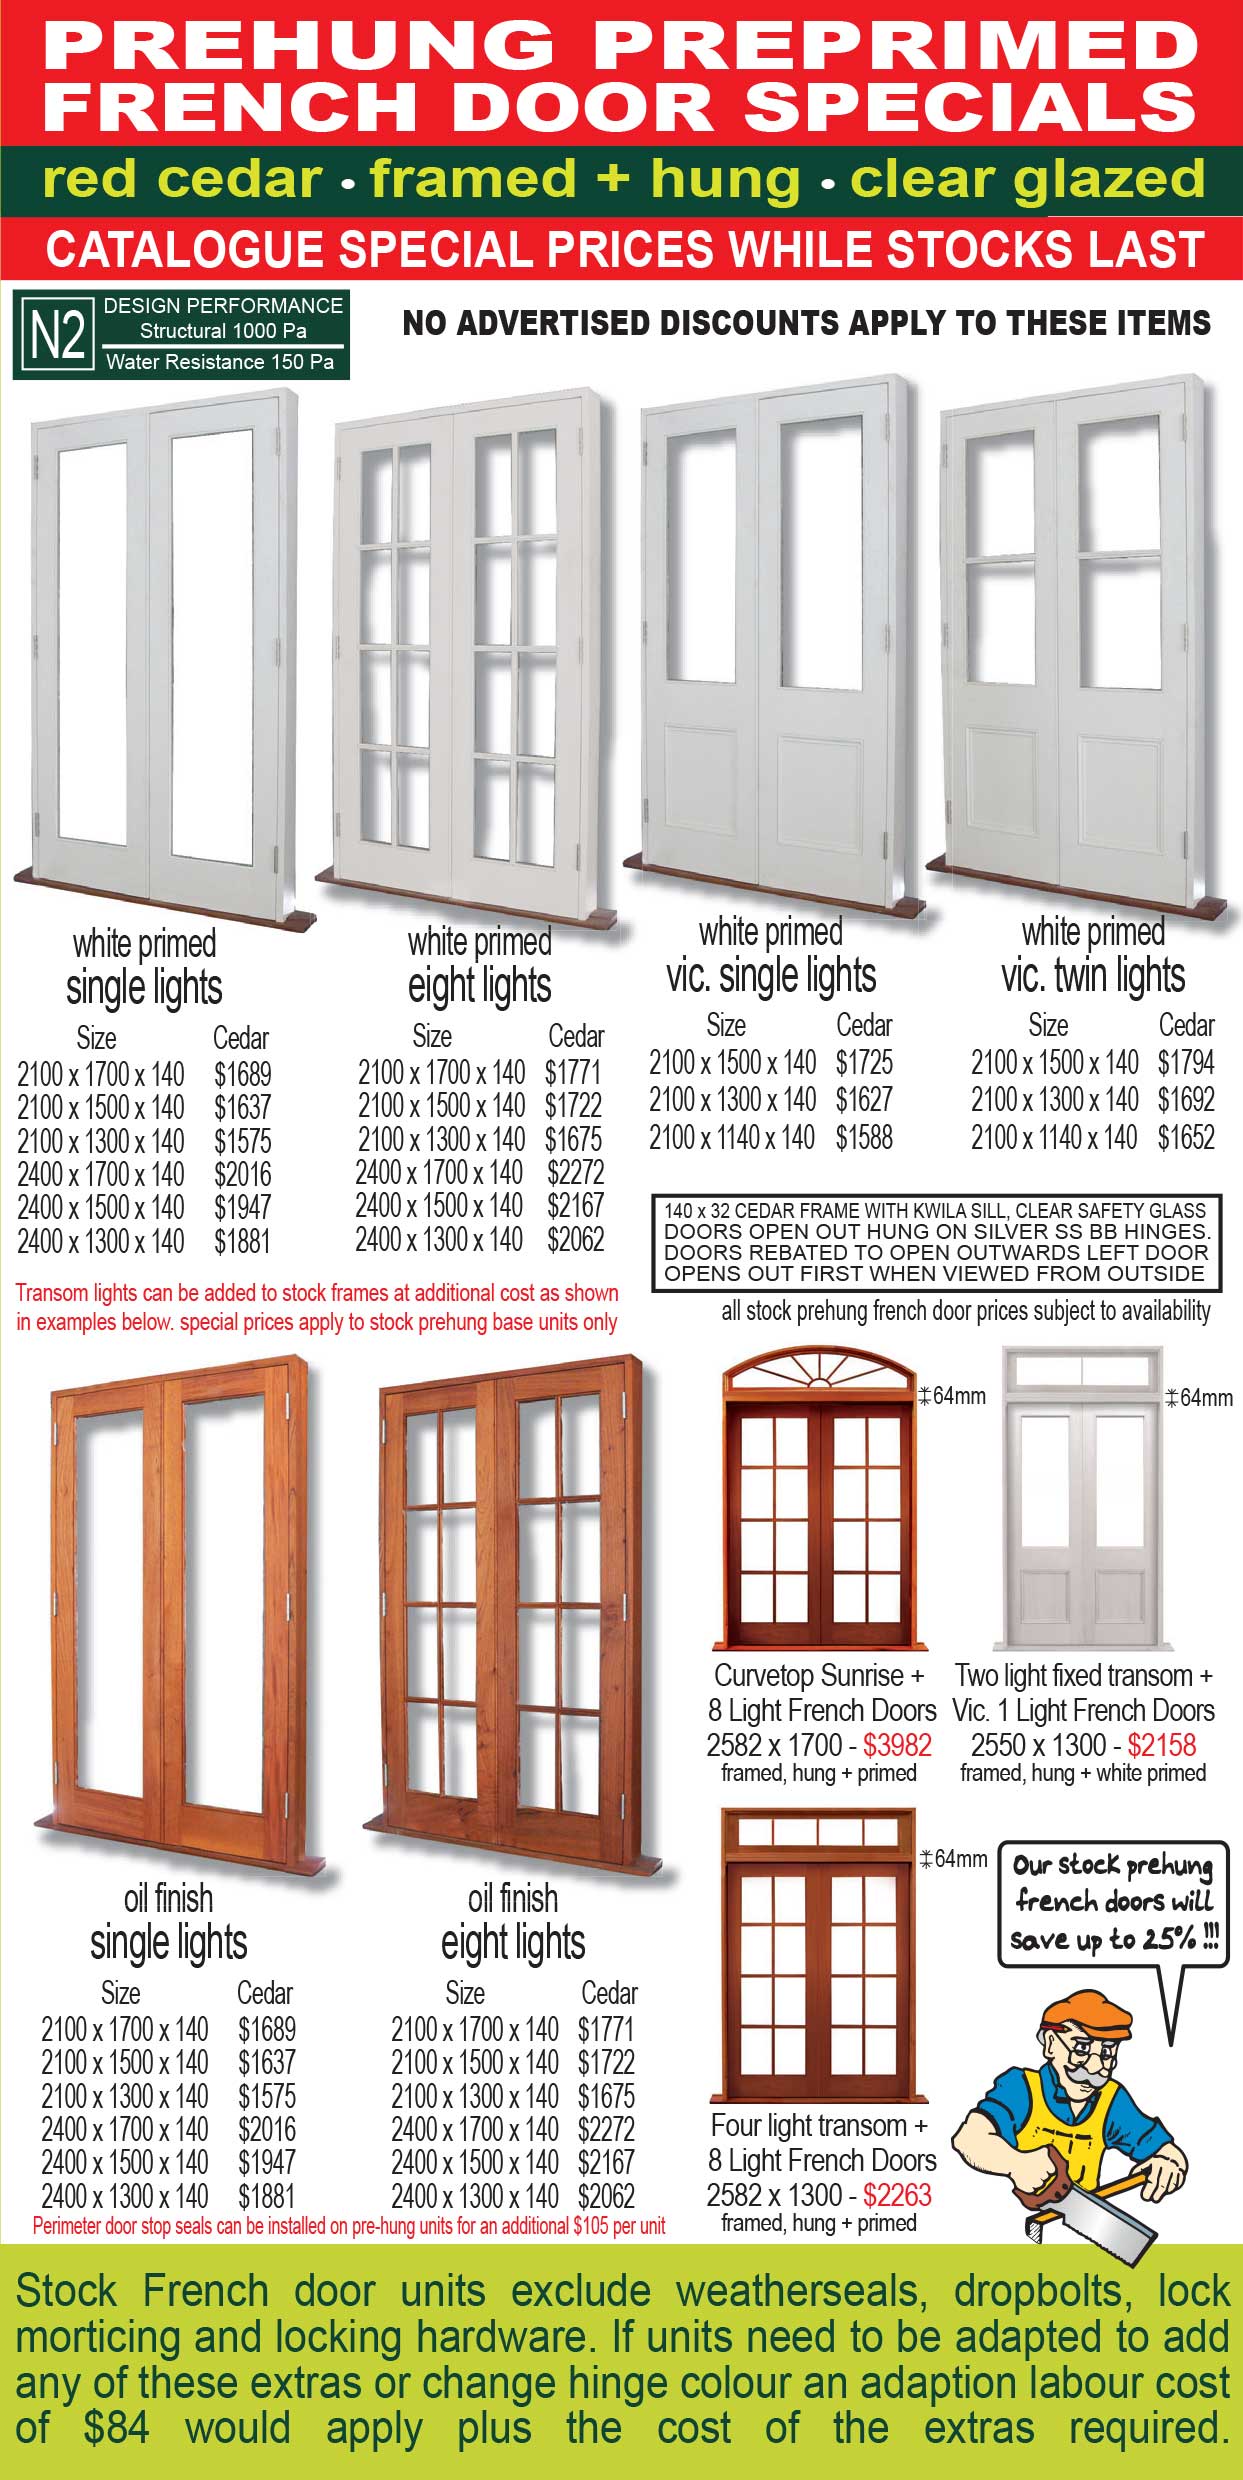 French Door Specials - save you up to 25%